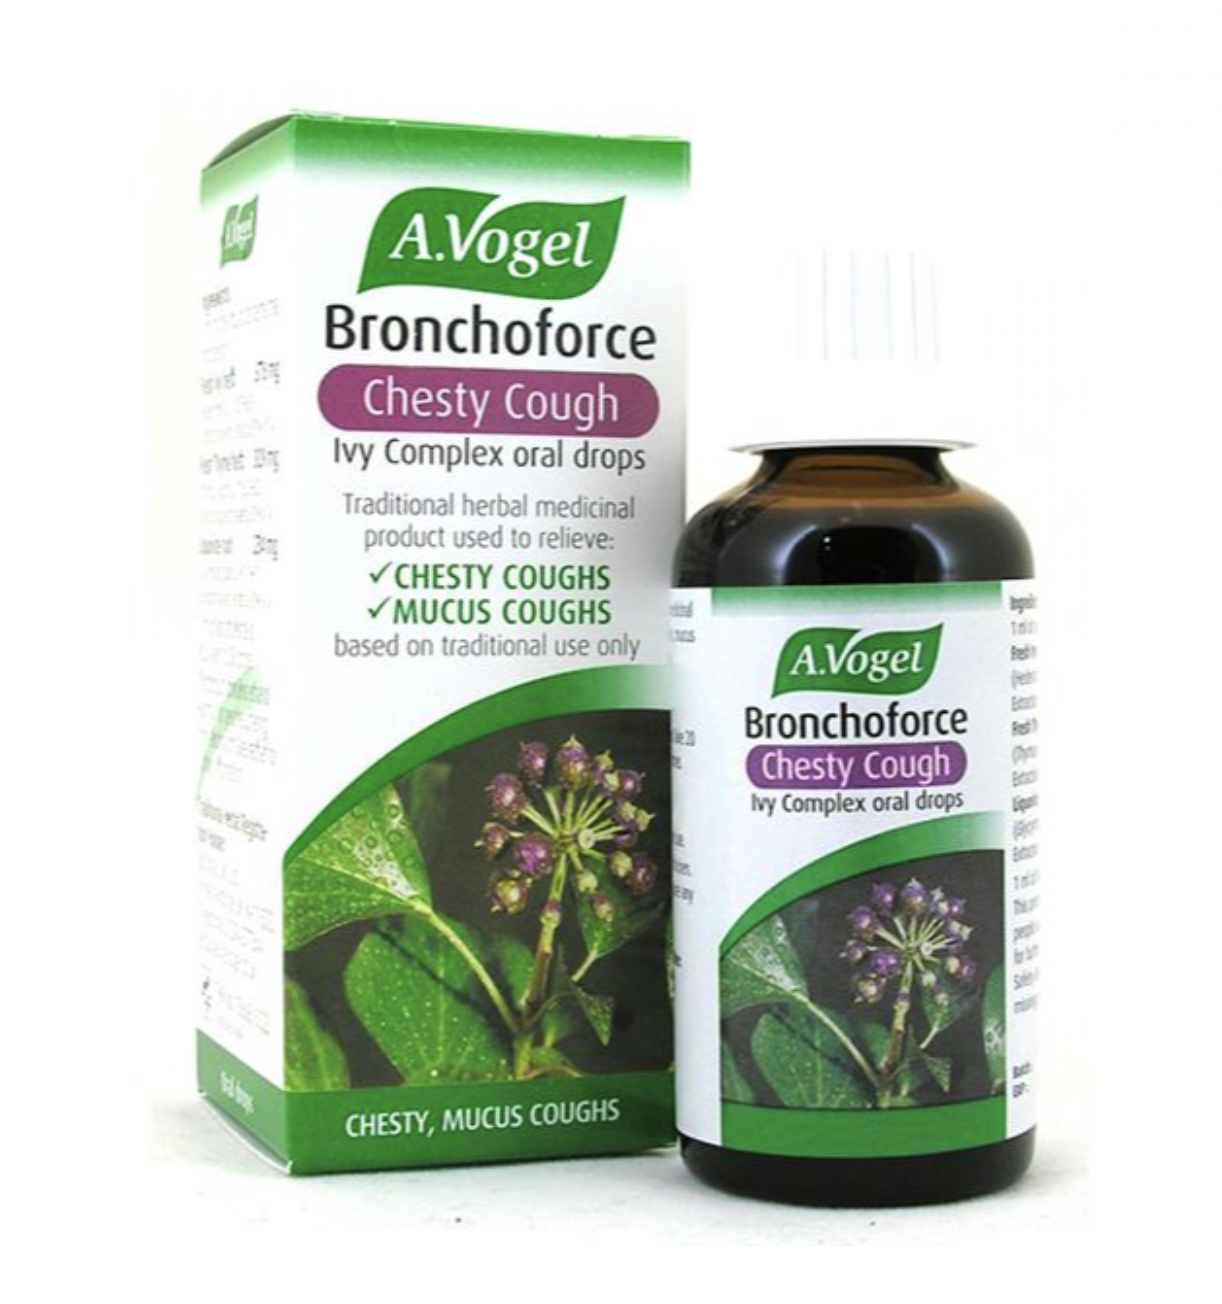 A.vogel Bronchoforce - Chesty Cough Remedy 50ml - Horans Healthstore